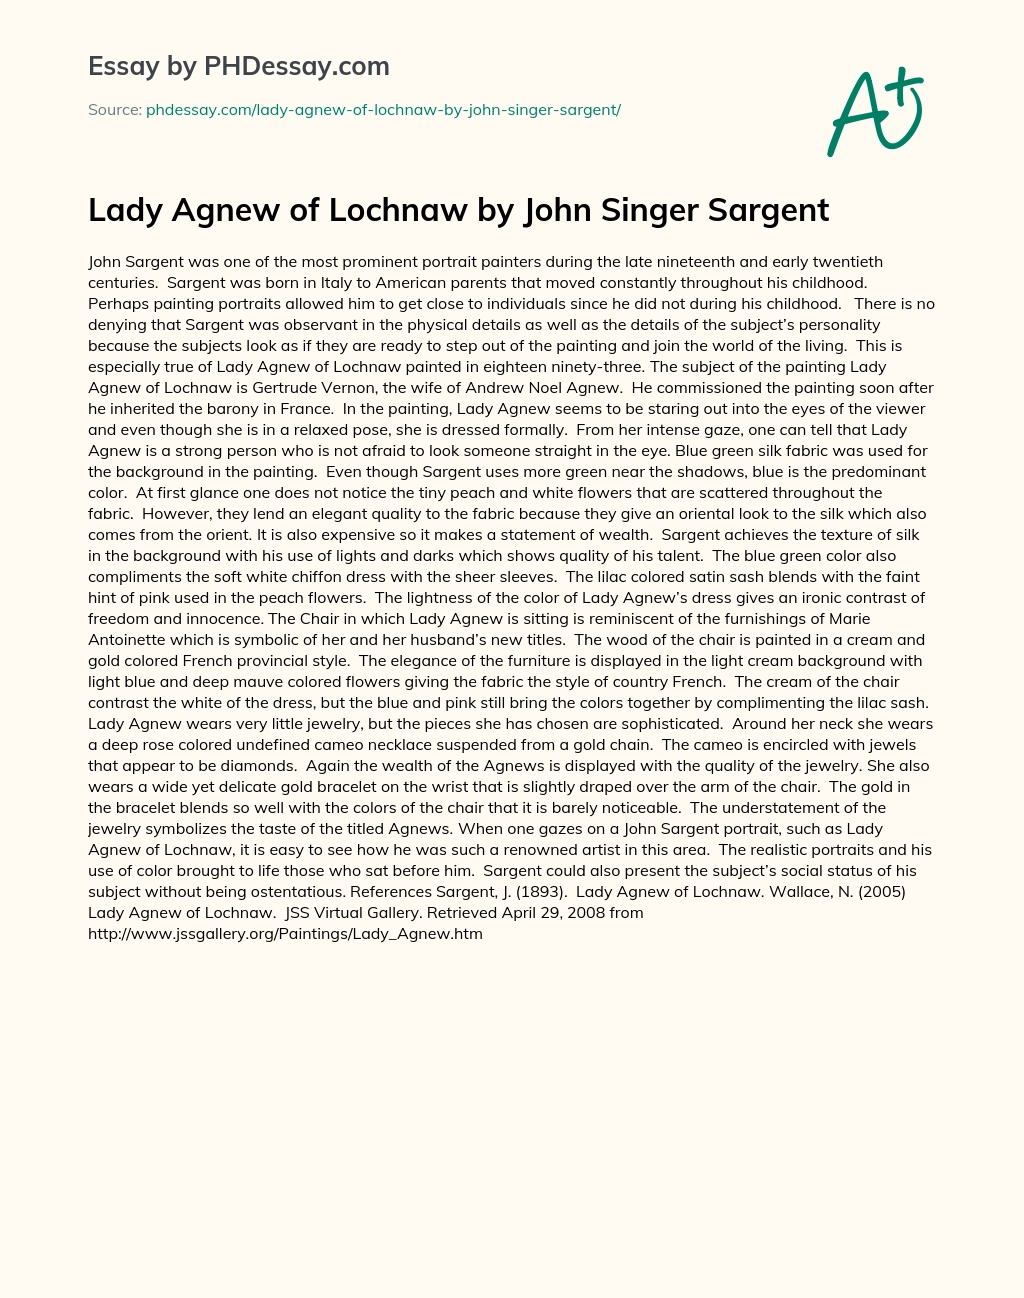 Lady Agnew of Lochnaw by John Singer Sargent essay